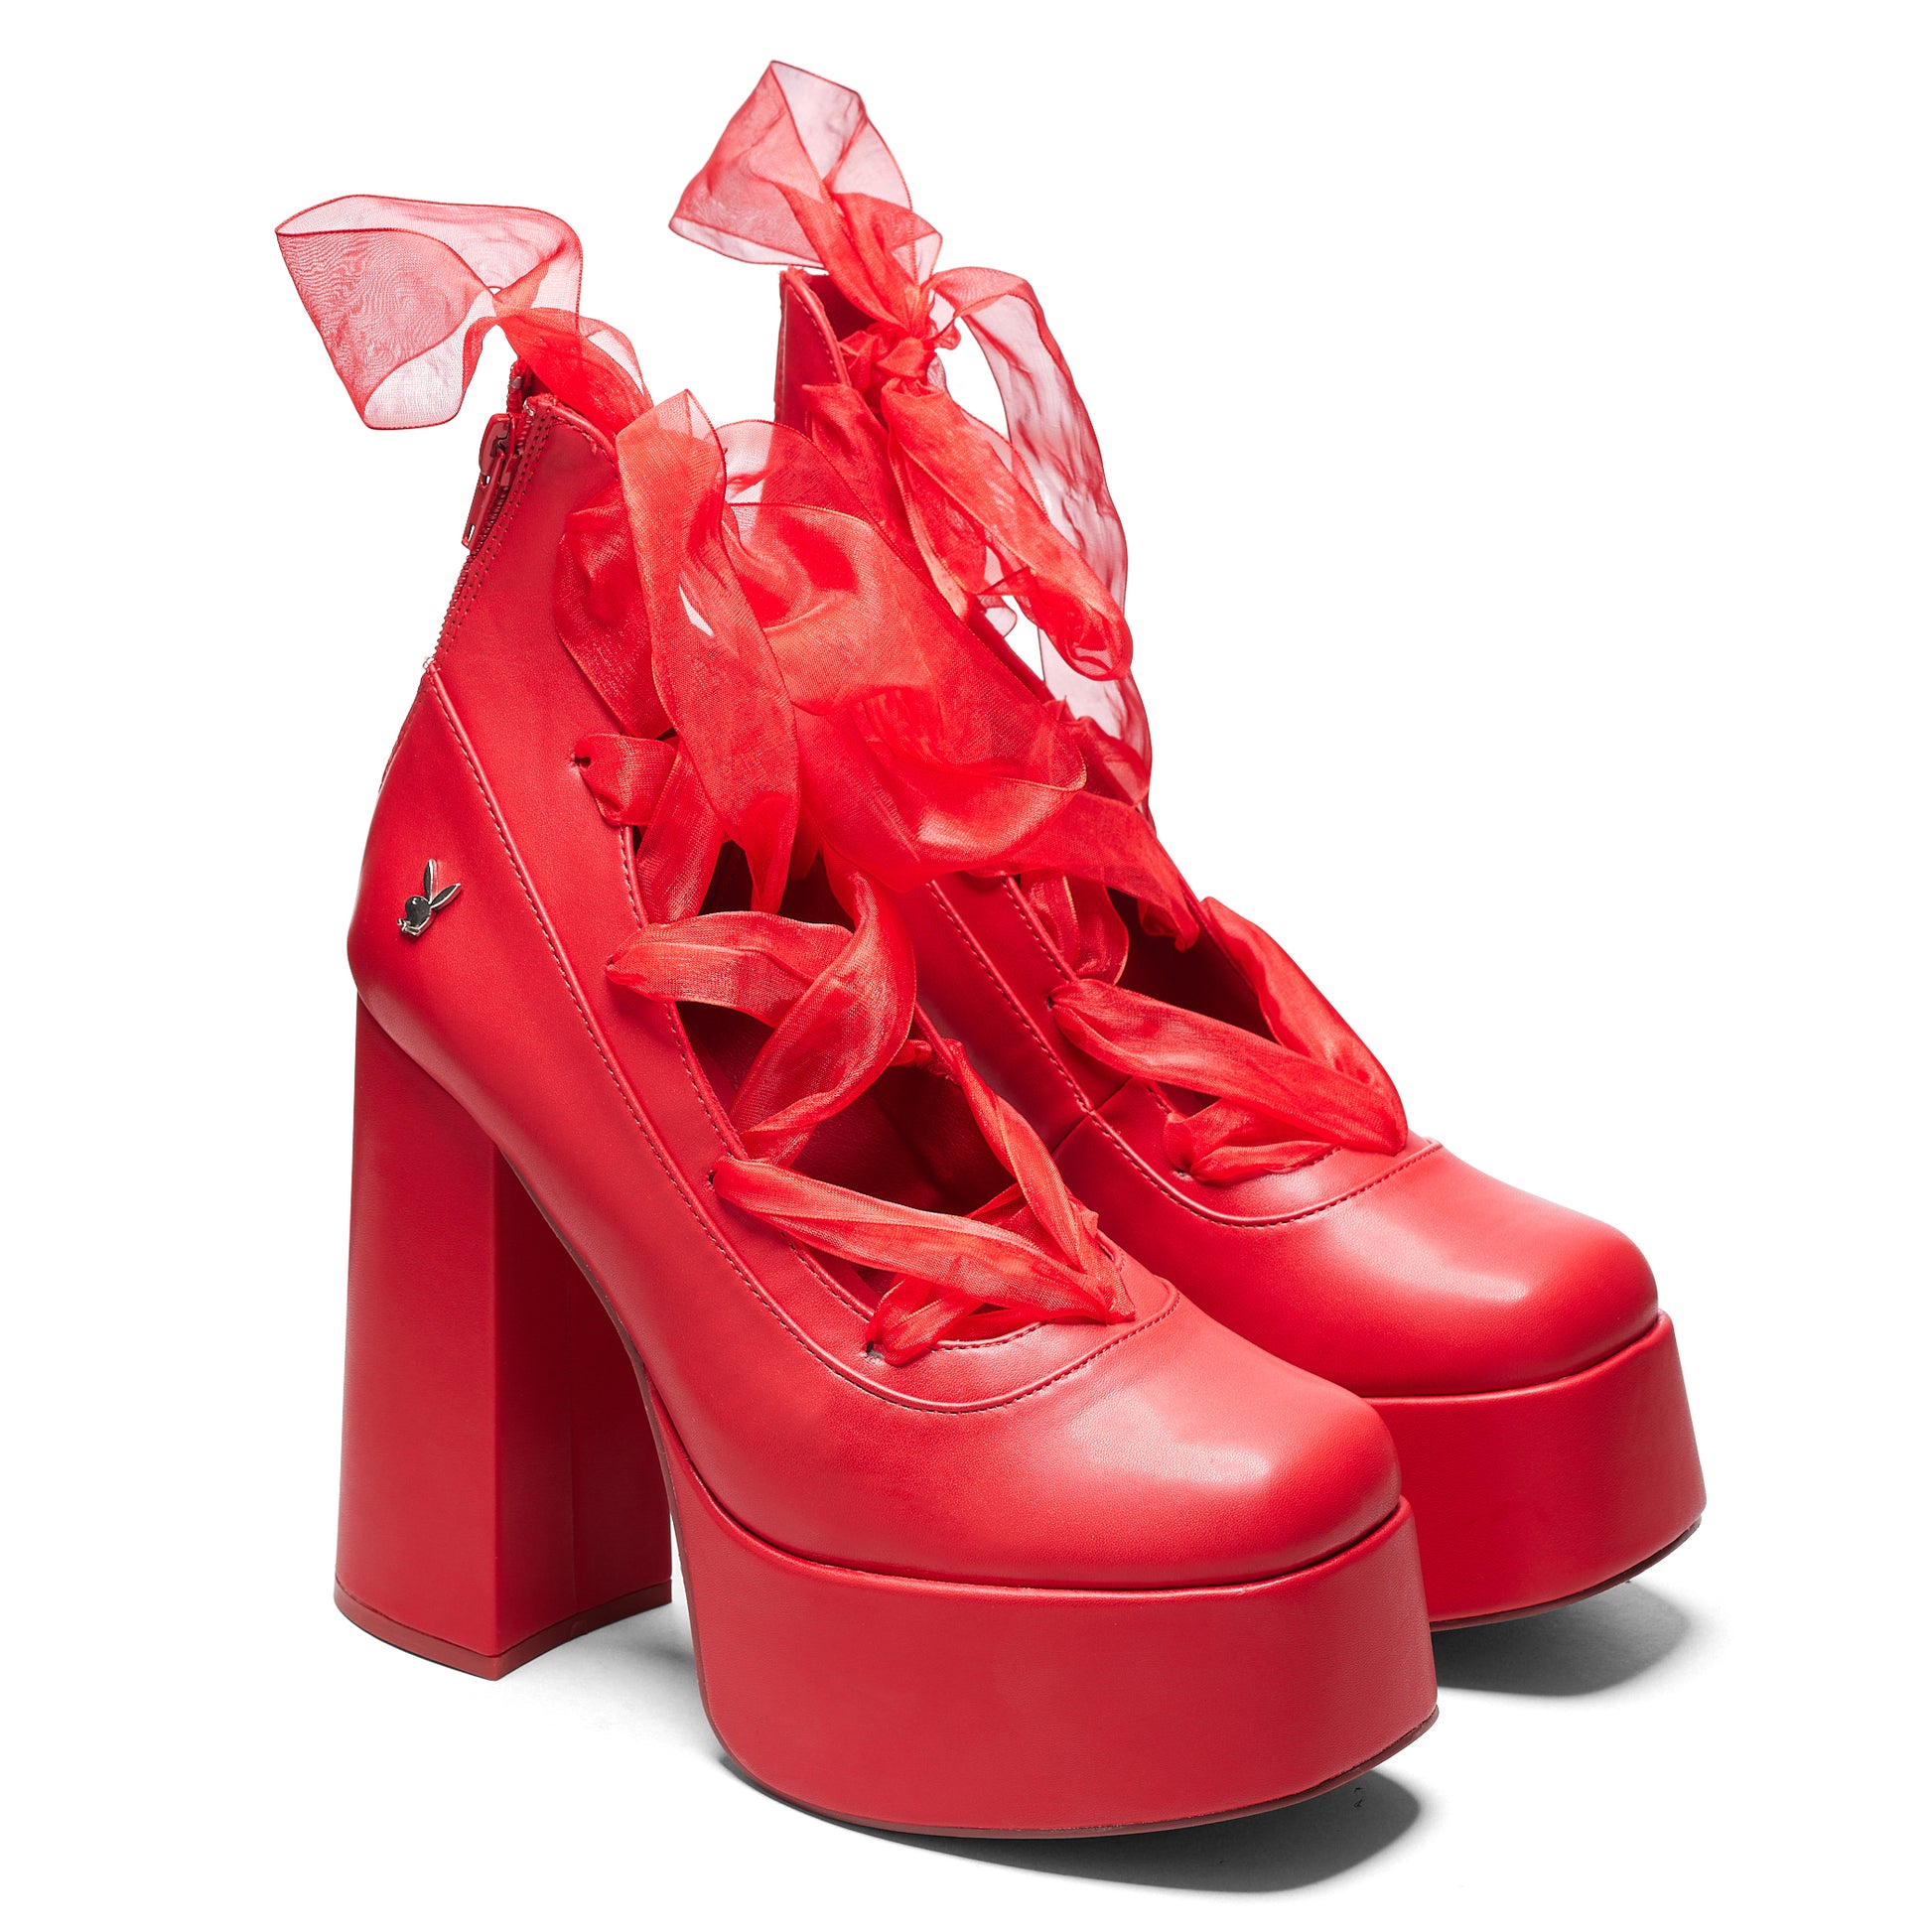 Playboy Infidelity Red Lace Up Heels - Shoes - KOI Footwear - Red - Three-Quarter View